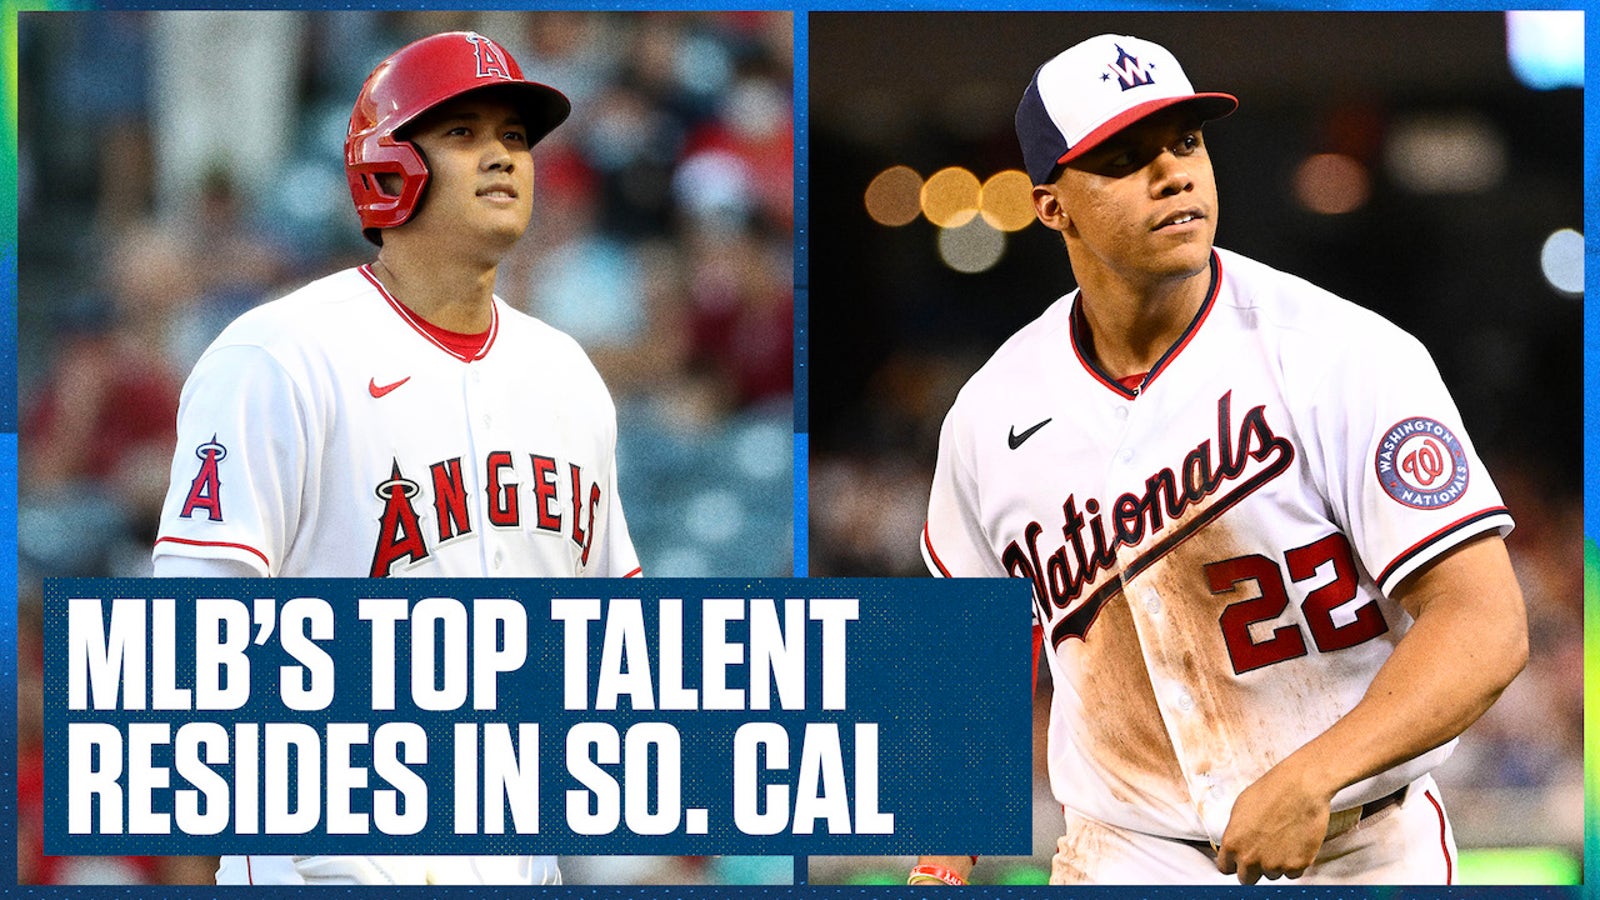 Shohei Ohtani, Juan Soto, and others have made Southern California the best pool of talent in MLB